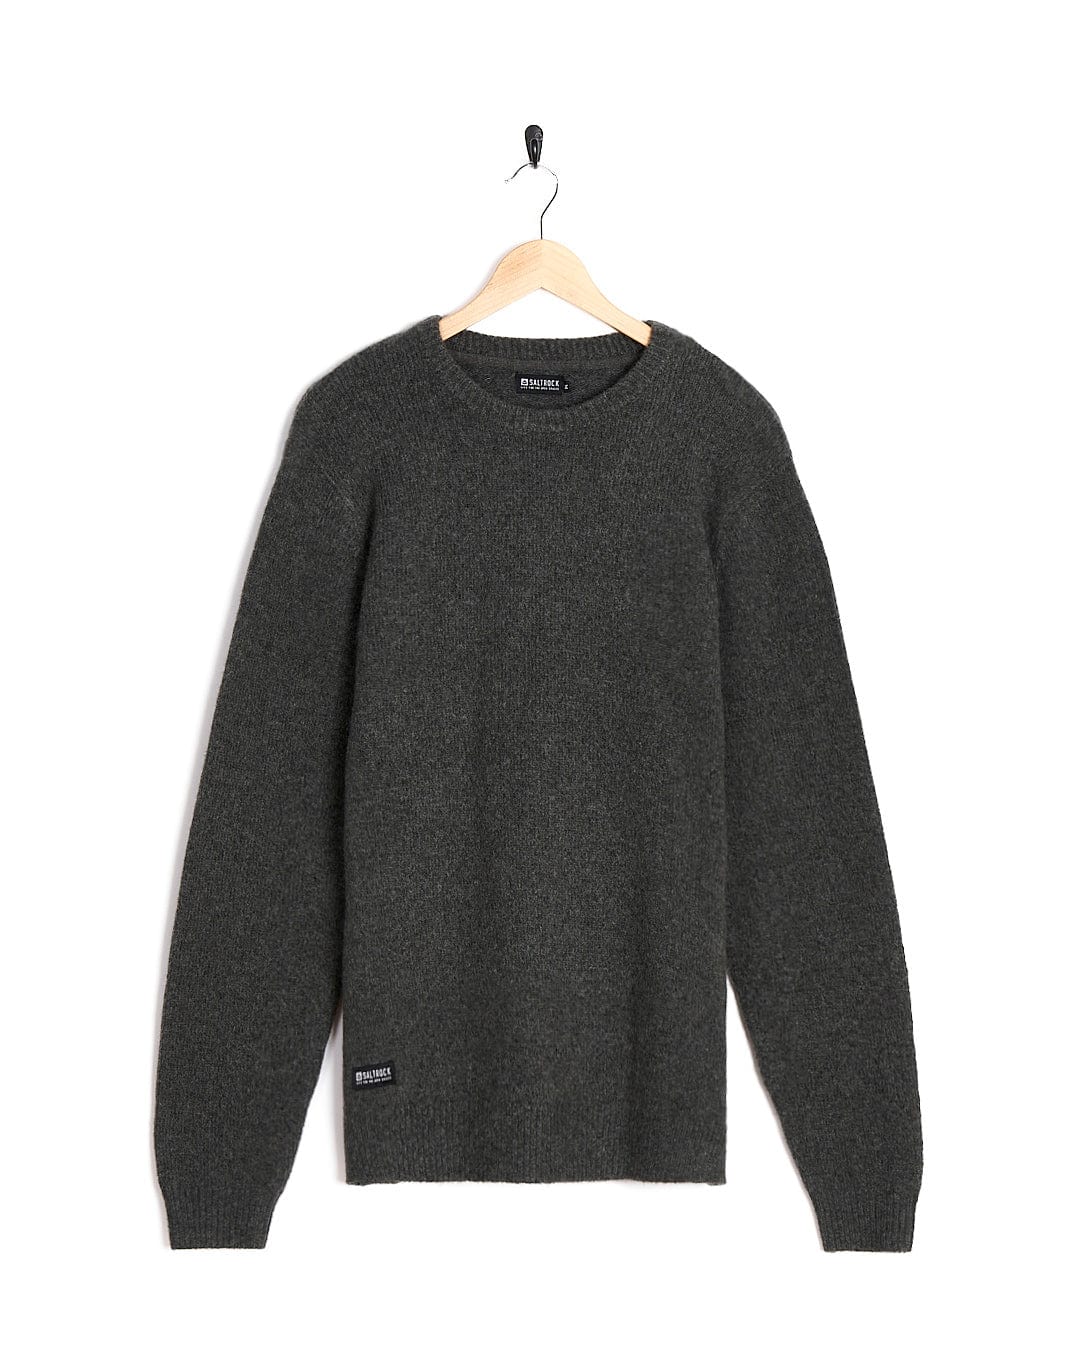 An elegant grey Saltrock sweater, the Bowen Mens Knitted Crew, gracefully hangs on a hanger, perfect for layering.